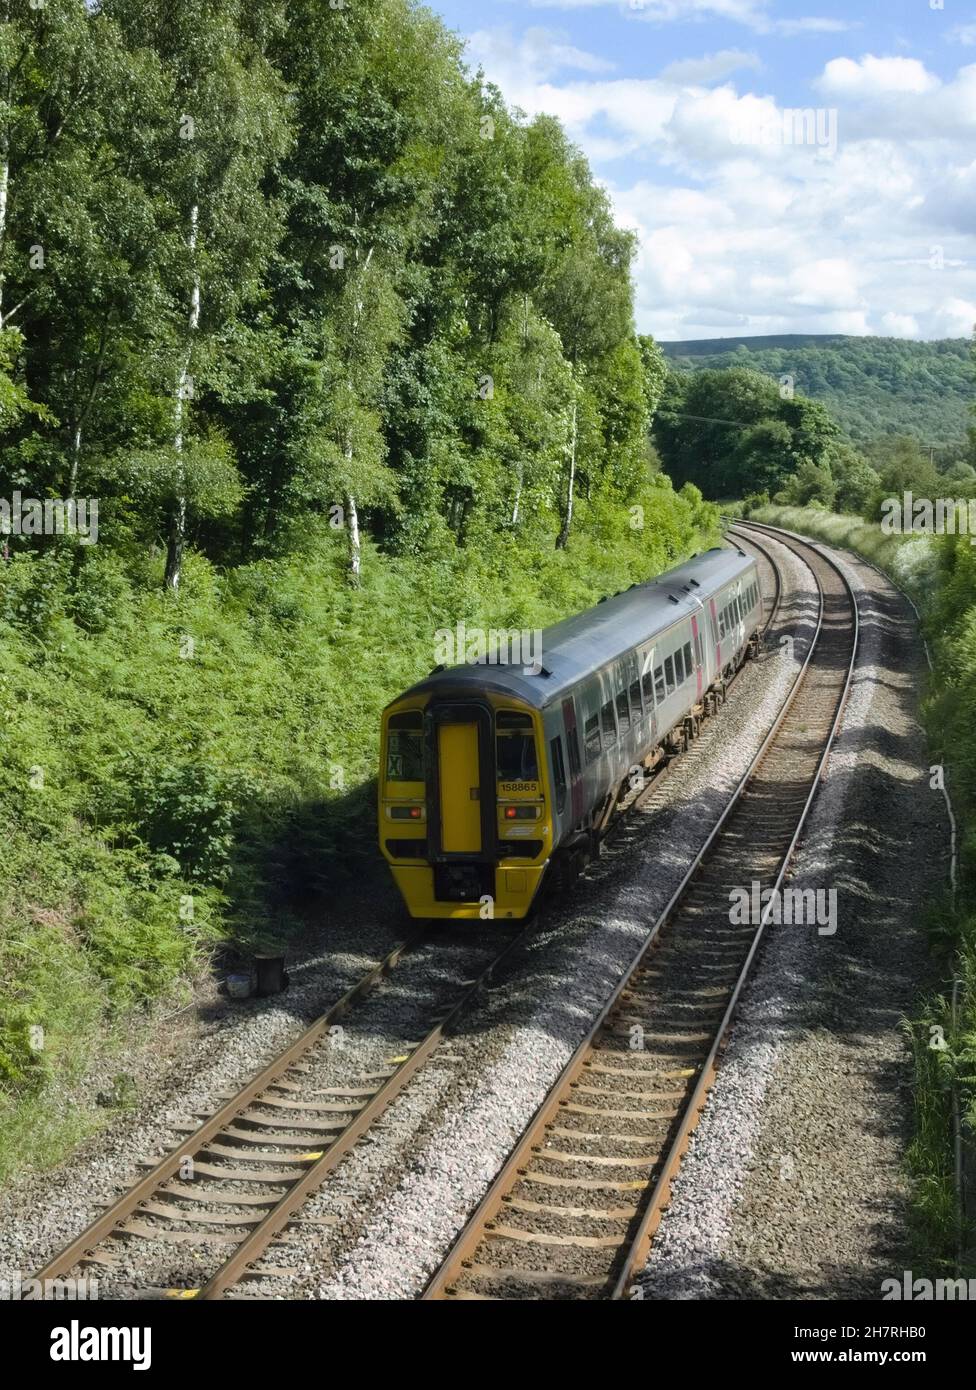 Class 158 passenger train, approaching Grindleford, on the Hope Valley line, Derbyshire, Peak district England Stock Photo